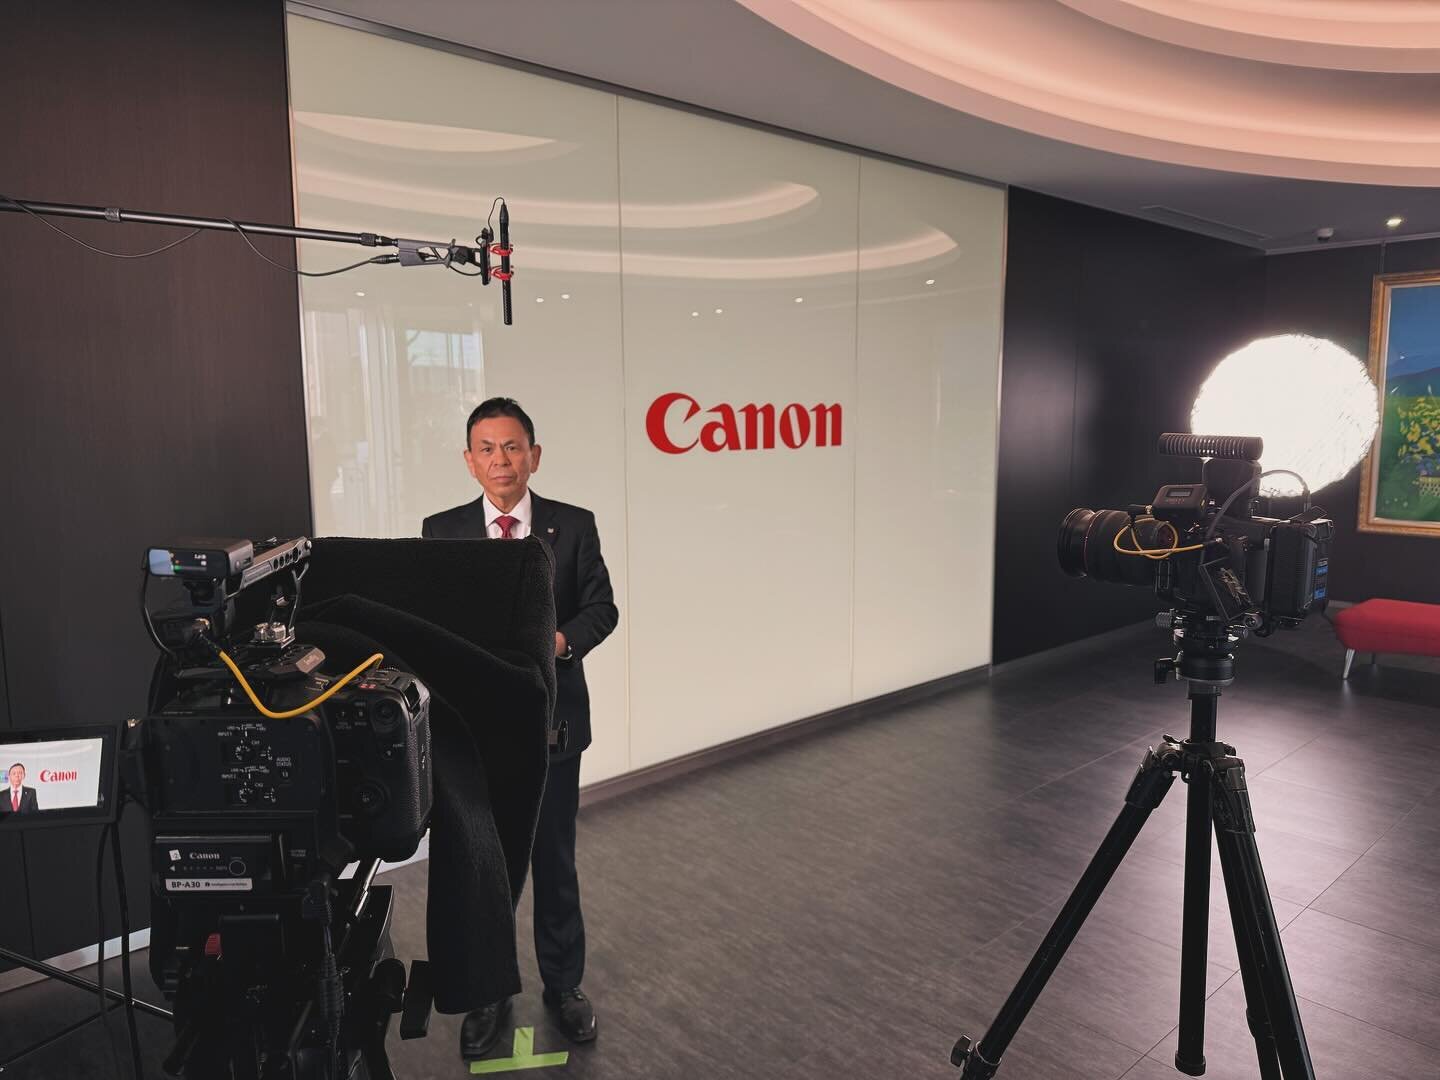 Bit of green screen and teleprompter work for Canon. Shot on Canon of course! #canonc70 #canonr5c  #filminginjapan